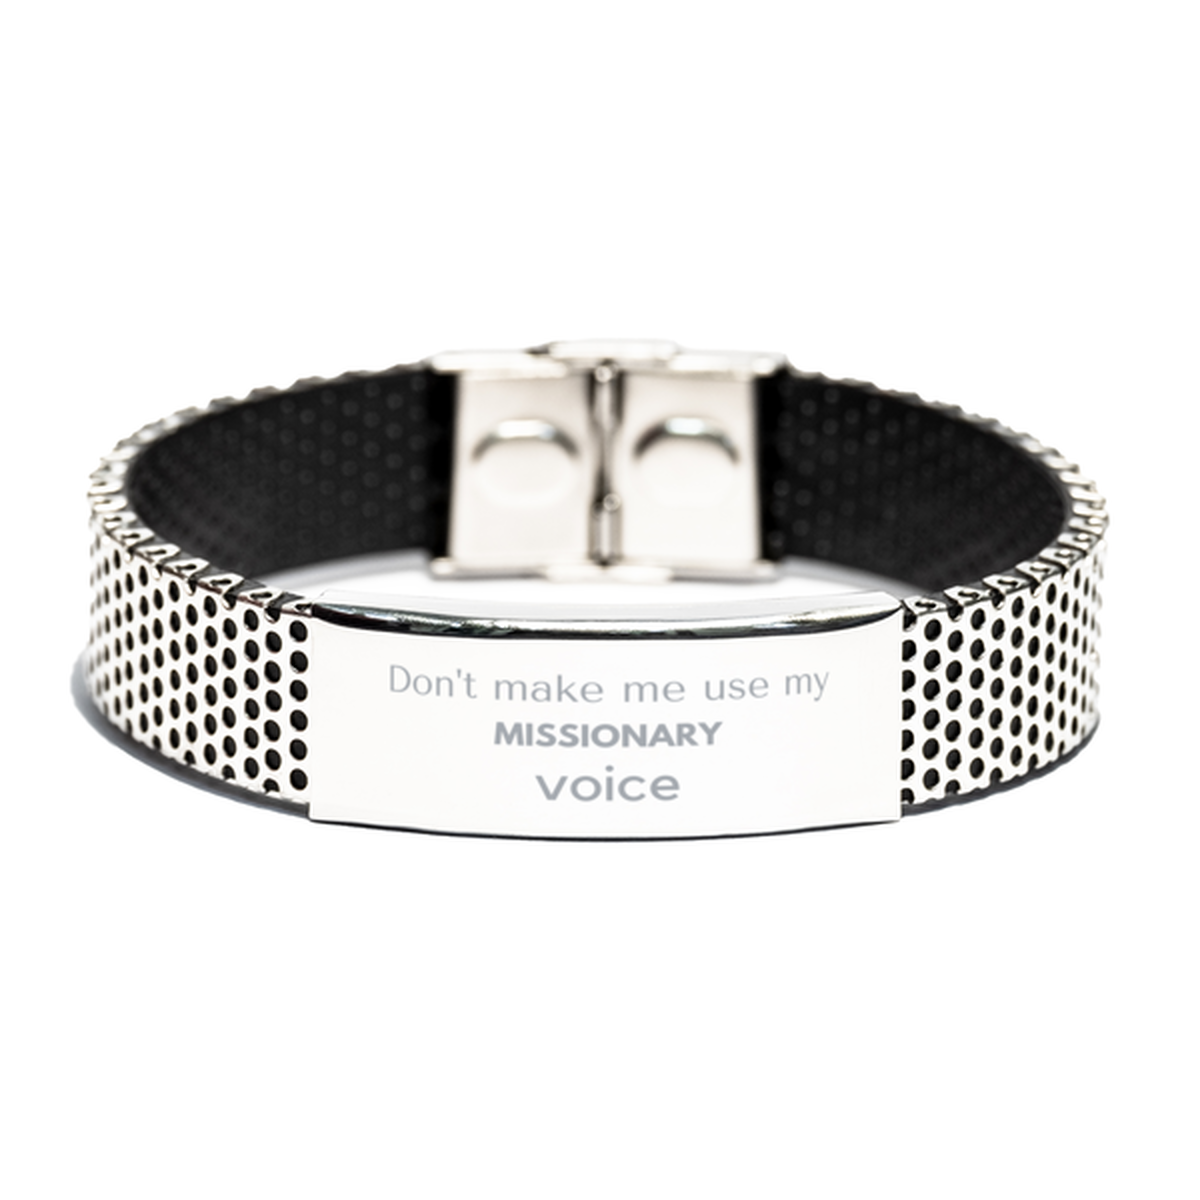 Don't make me use my Missionary voice, Sarcasm Missionary Gifts, Christmas Missionary Stainless Steel Bracelet Birthday Unique Gifts For Missionary Coworkers, Men, Women, Colleague, Friends